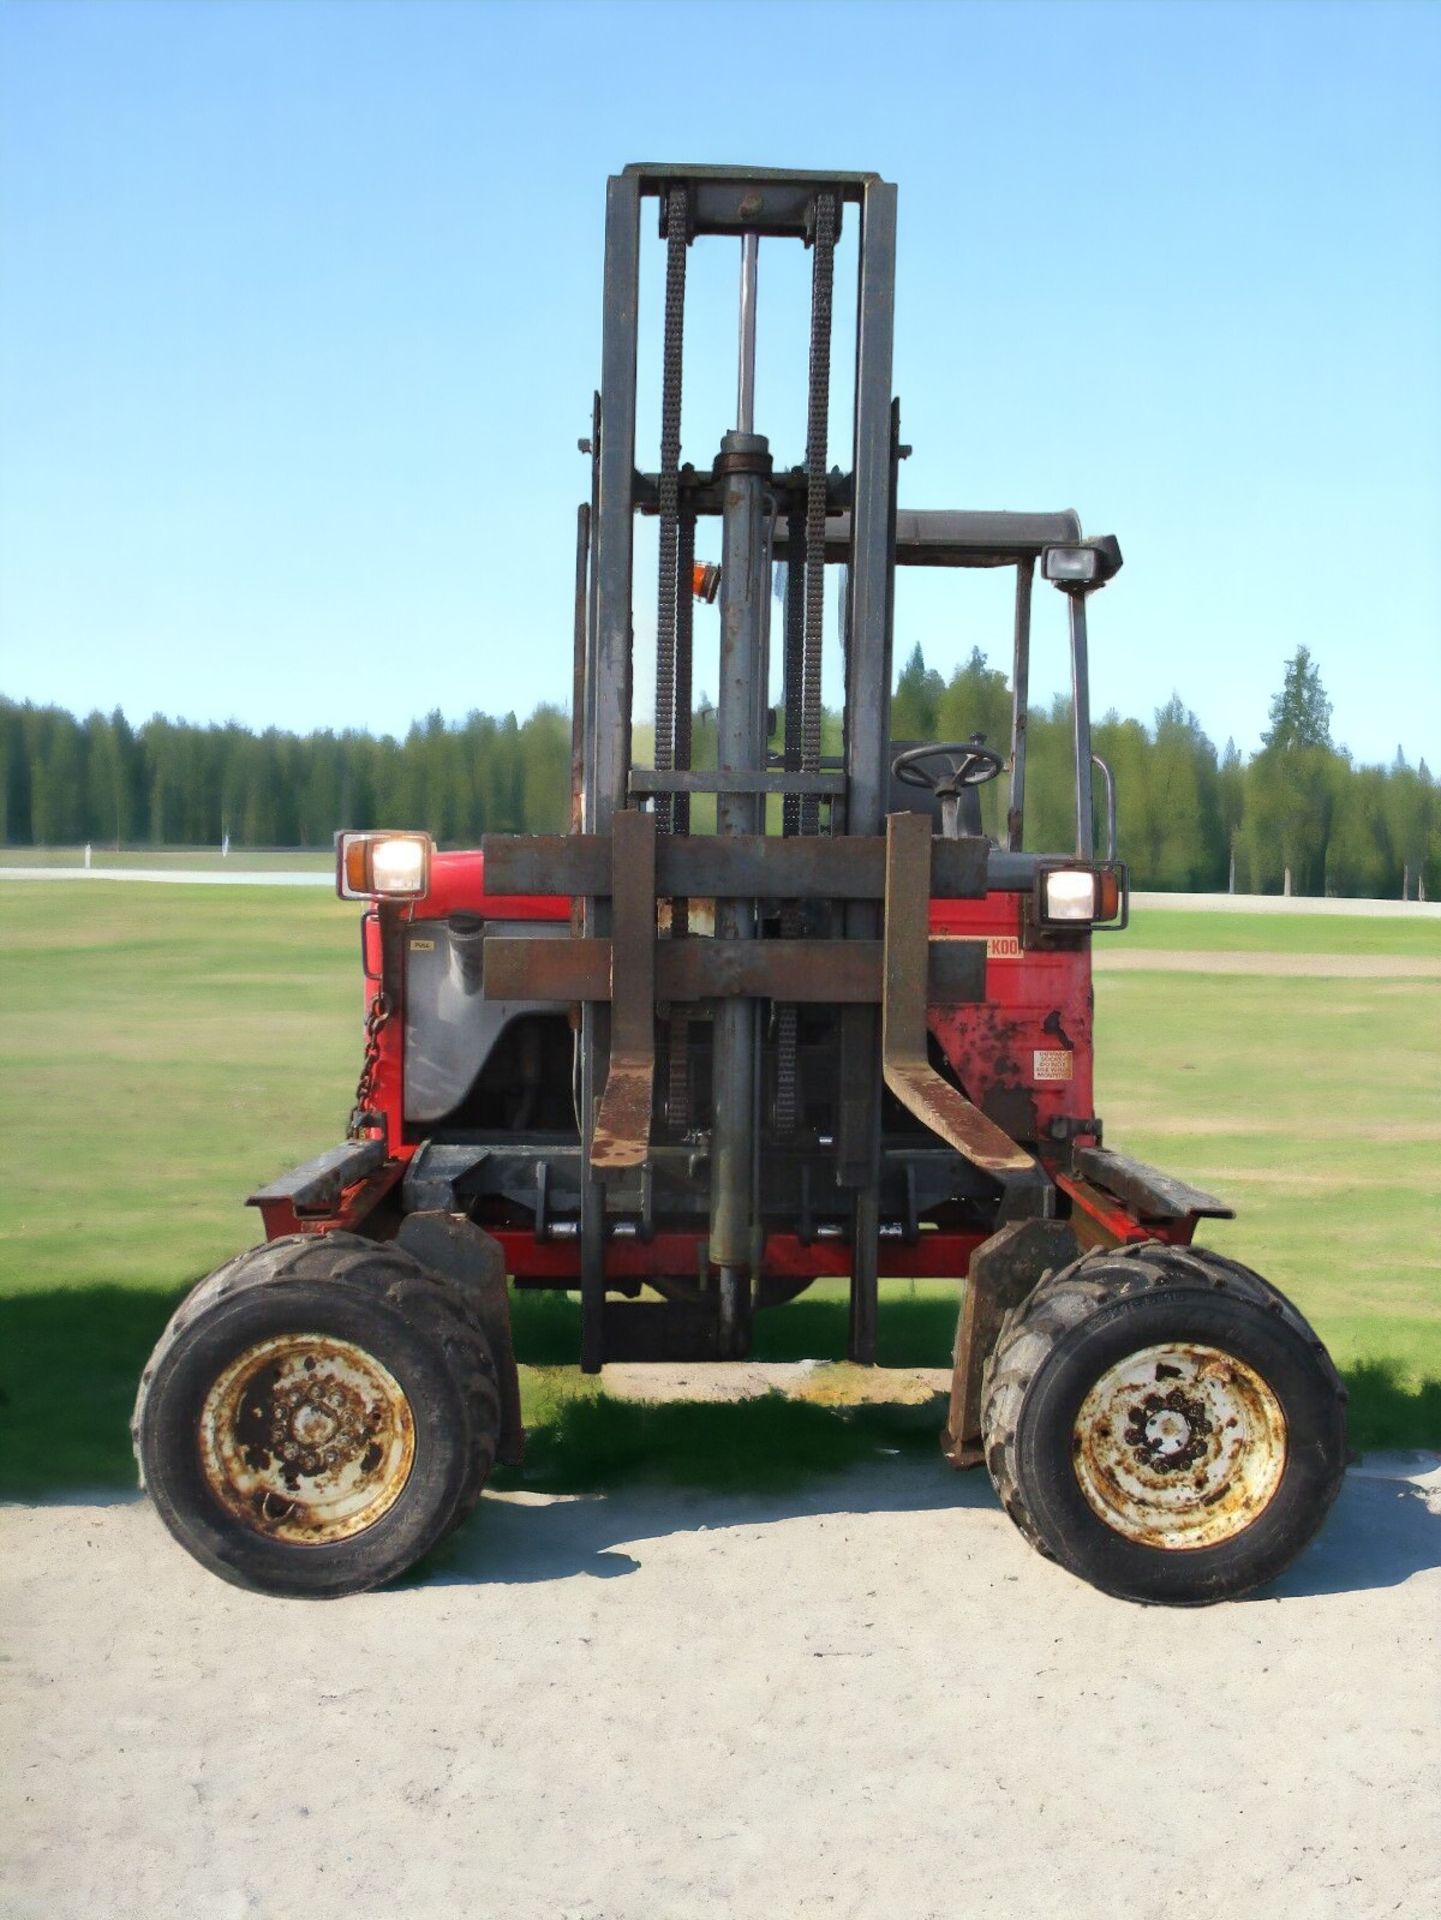 TERRAIN WITH THE MIGHTY MOFFETT MOUNTY M8 25.4 FORKLIFT - Image 13 of 14